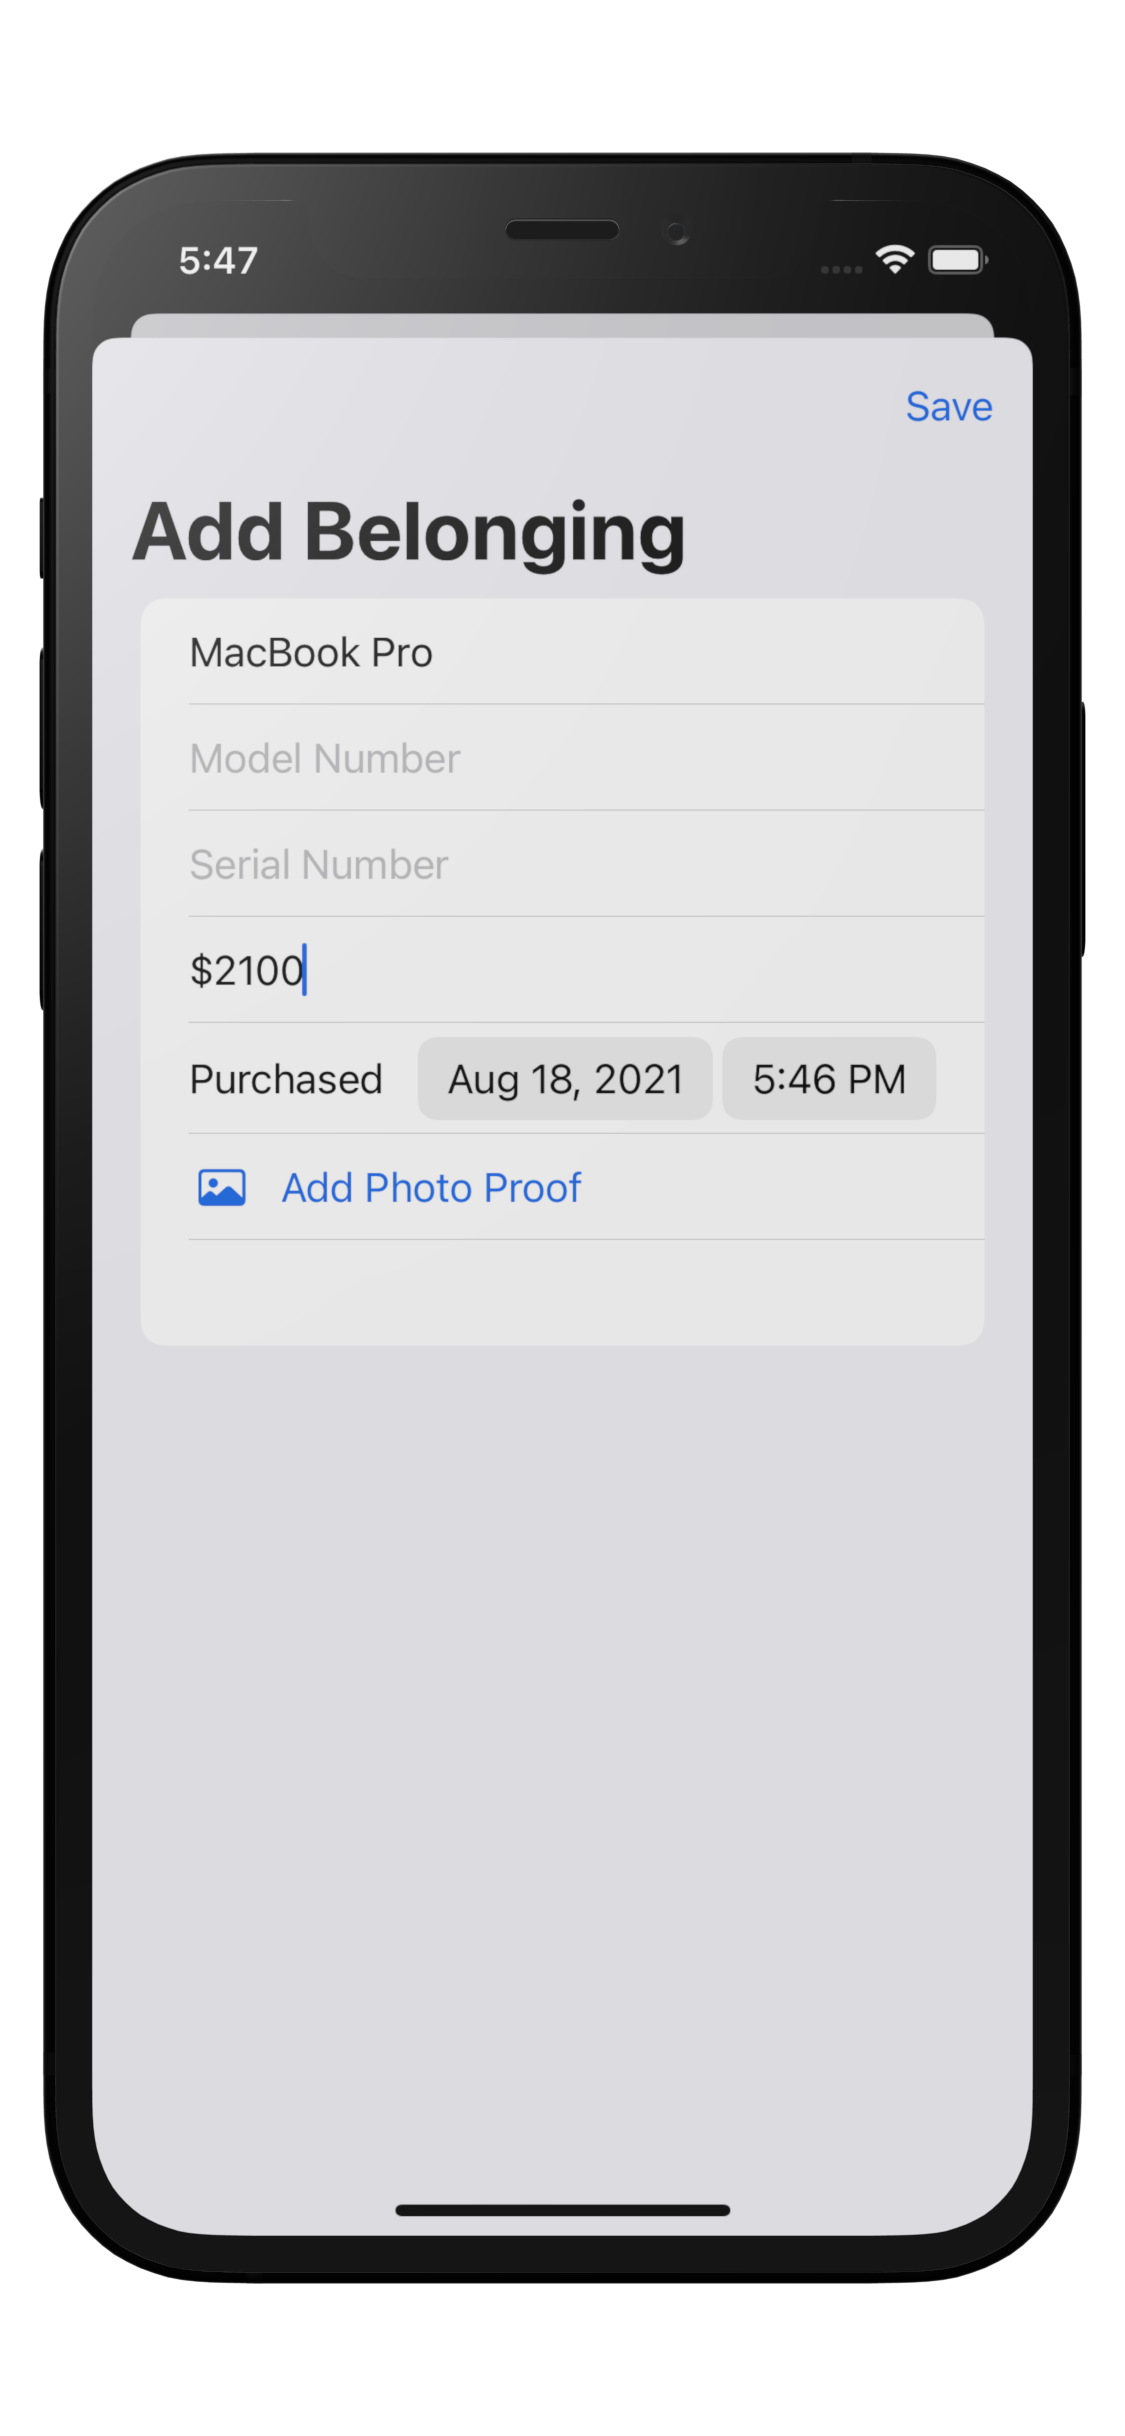 Image of adding a belonging within the home inventory app